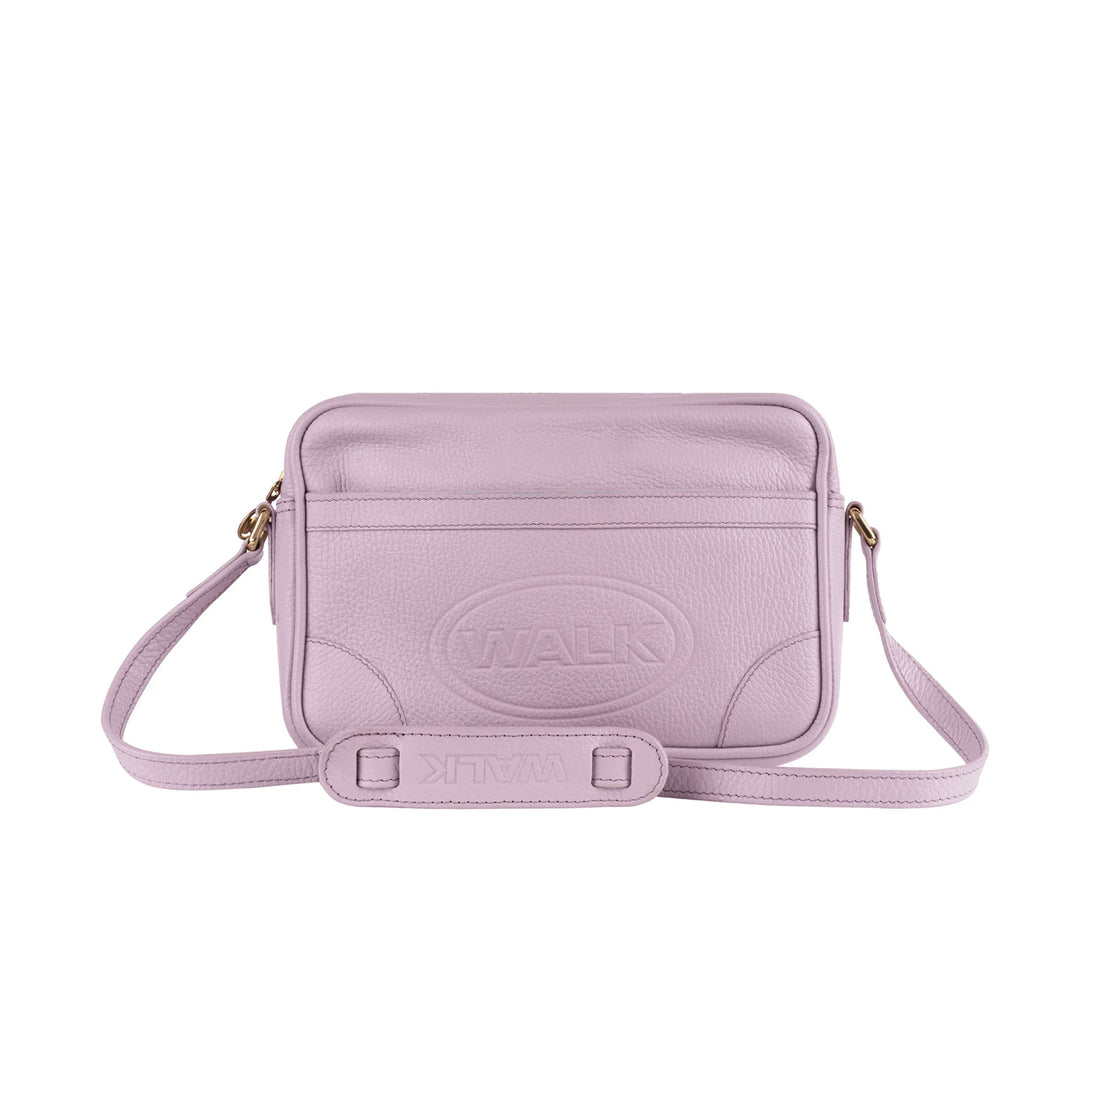 THE LILAC LEATHER BAG